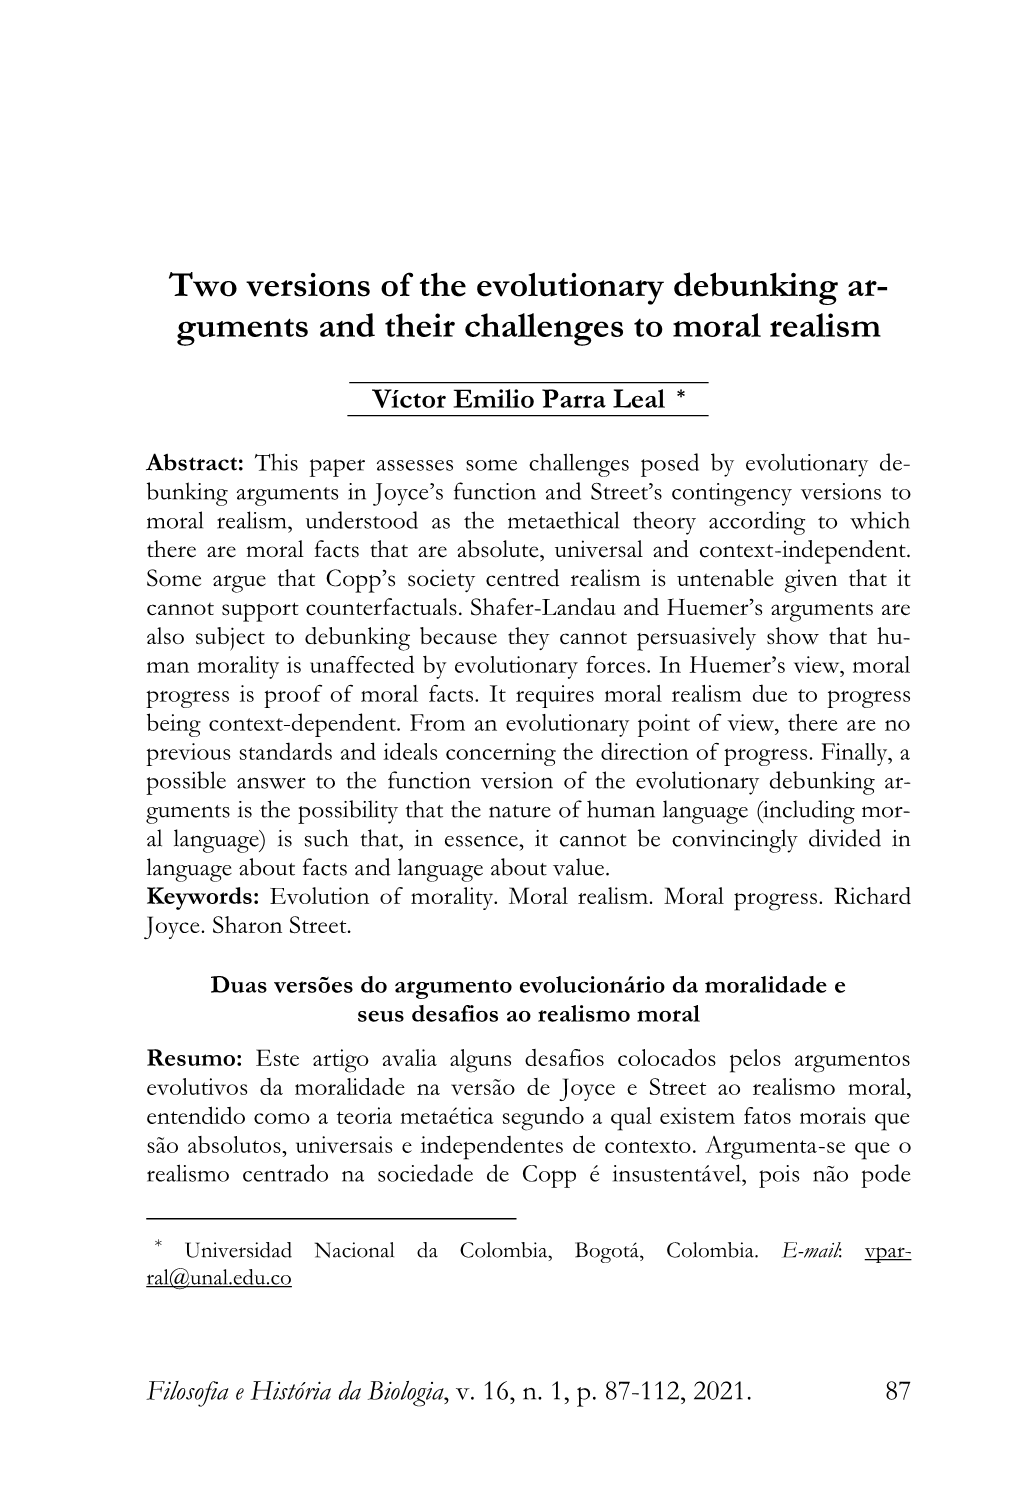 Two Versions of the Evolutionary Debunking Arguments and Their